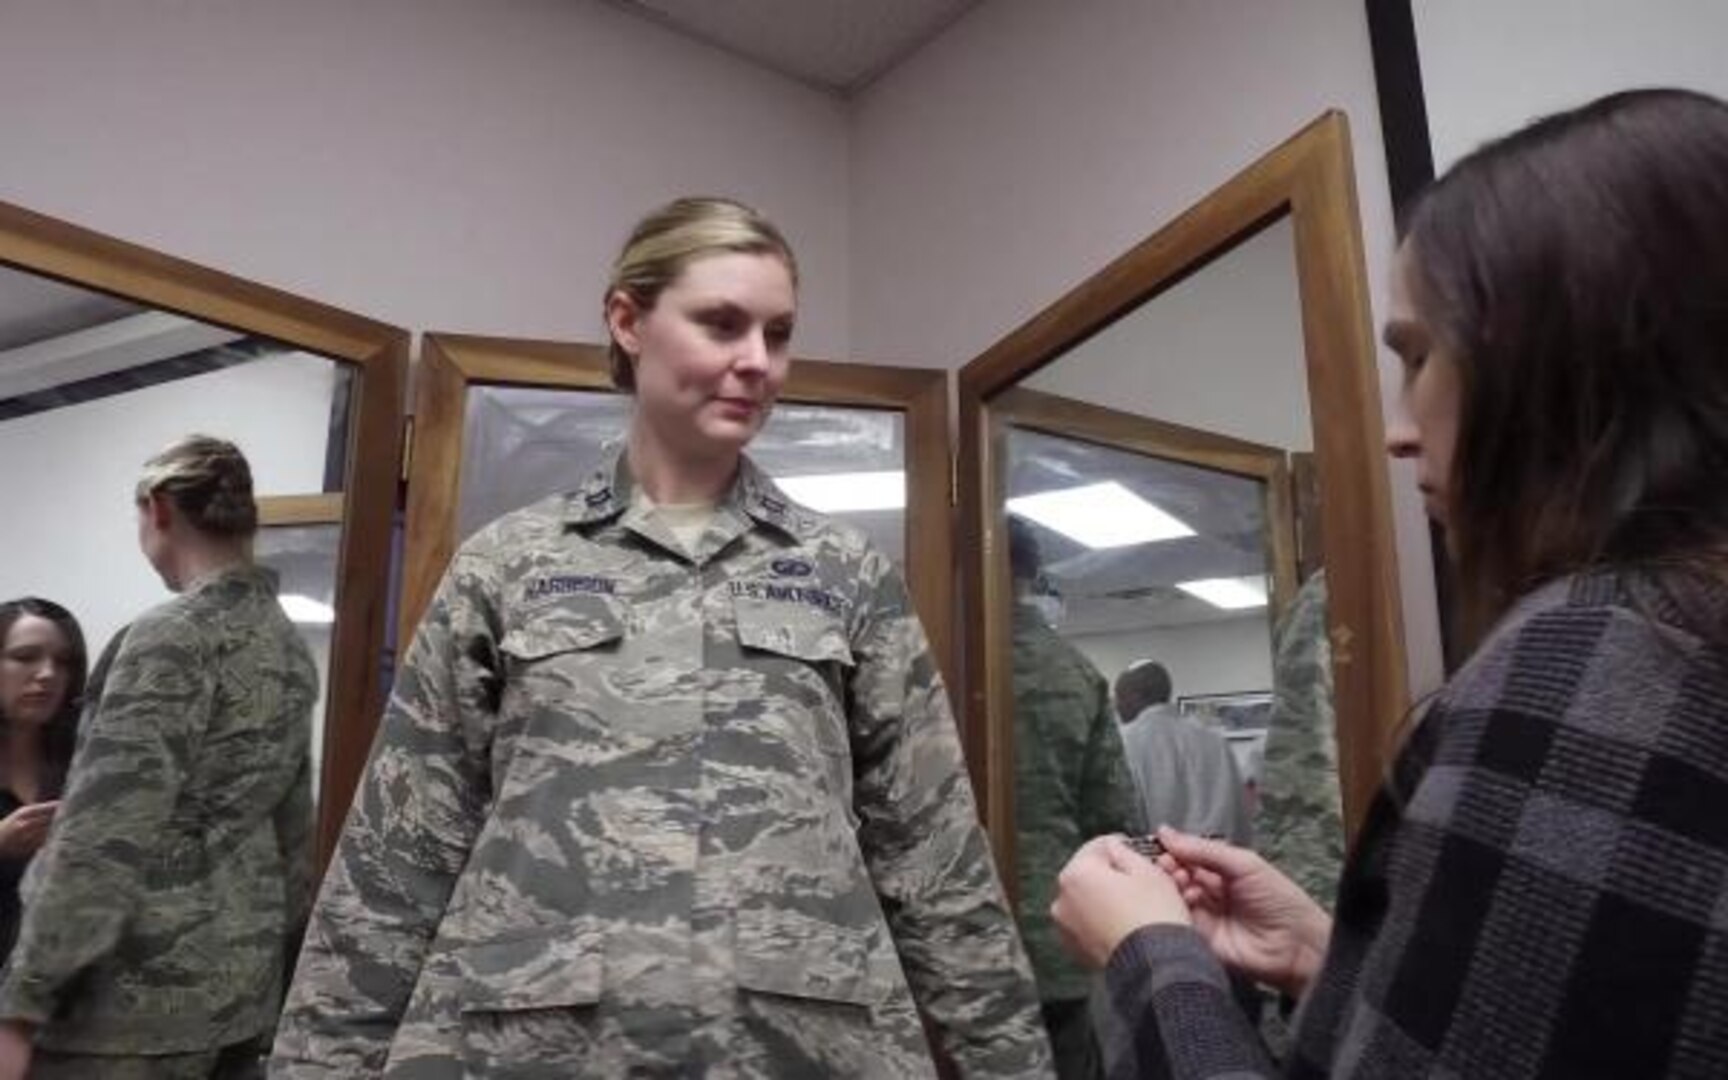 DLA provides maternity uniforms that help airmen ‘fit in’ while